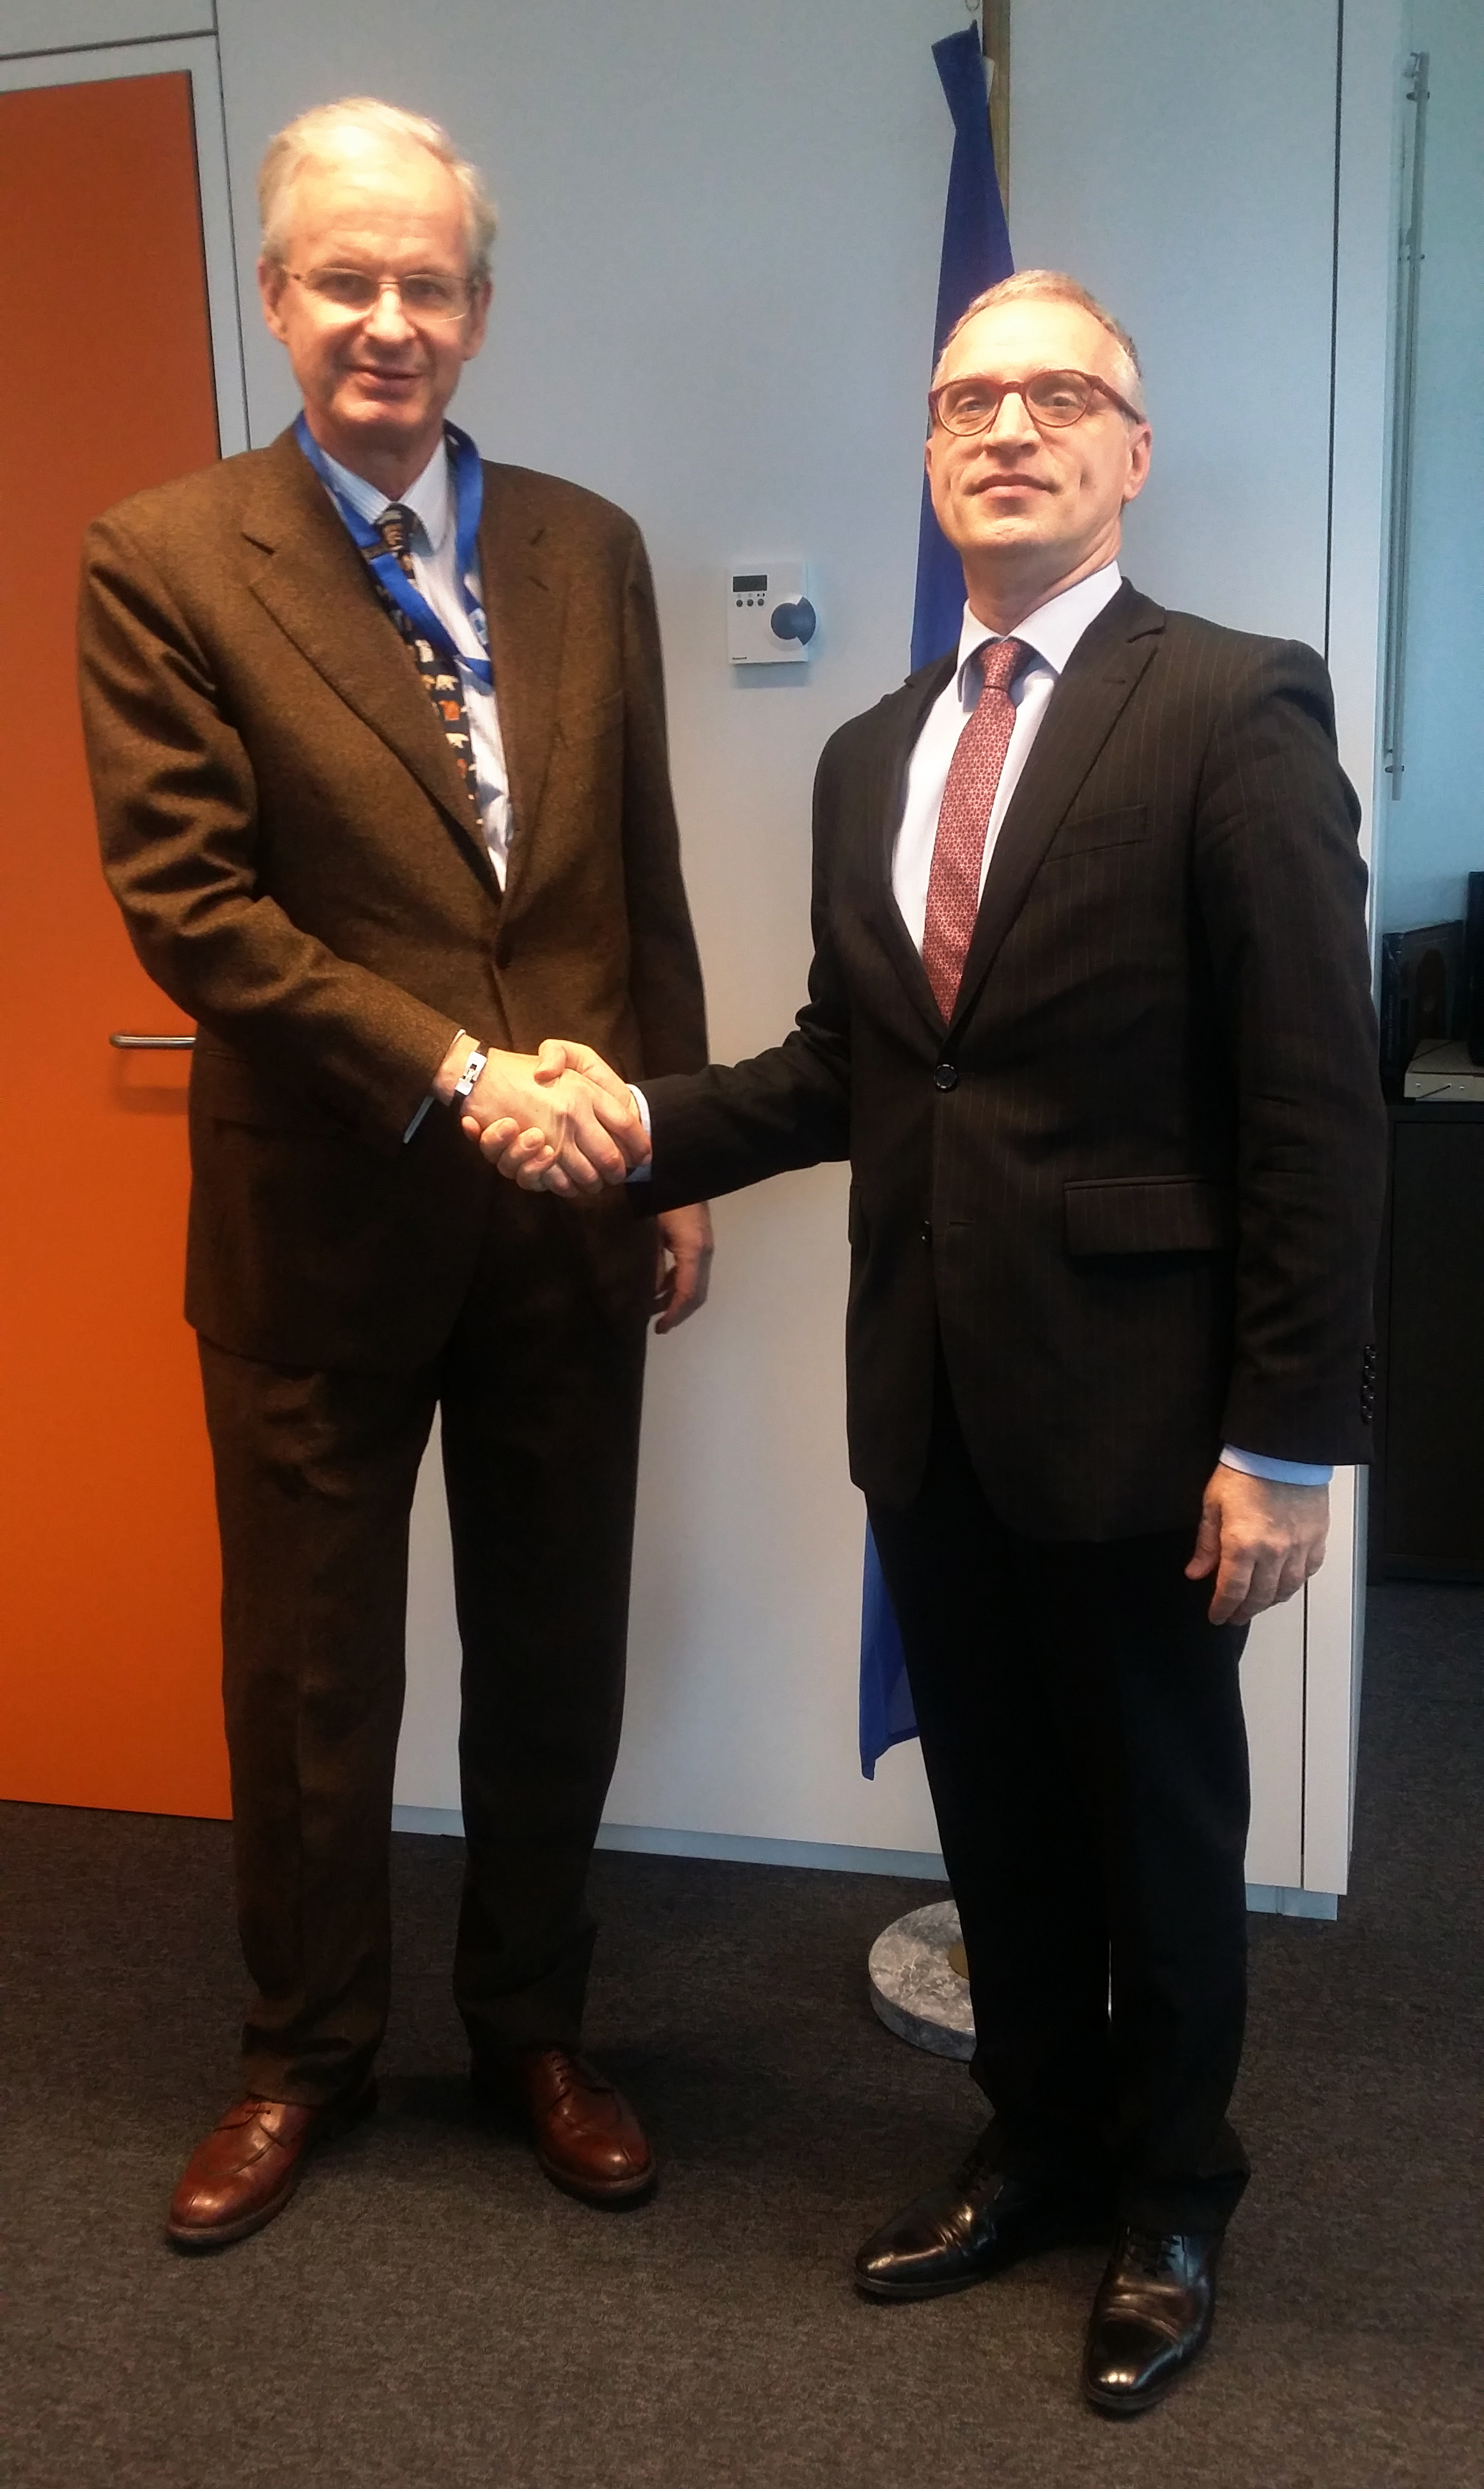 RCC Secretary General, Goran Svilanovic (right), meets Christian Danielsson, Director General for Enlargement at the European Commission, in Brussels on 7 February 2017. (Photo: RCC/Ivana Petricevic)